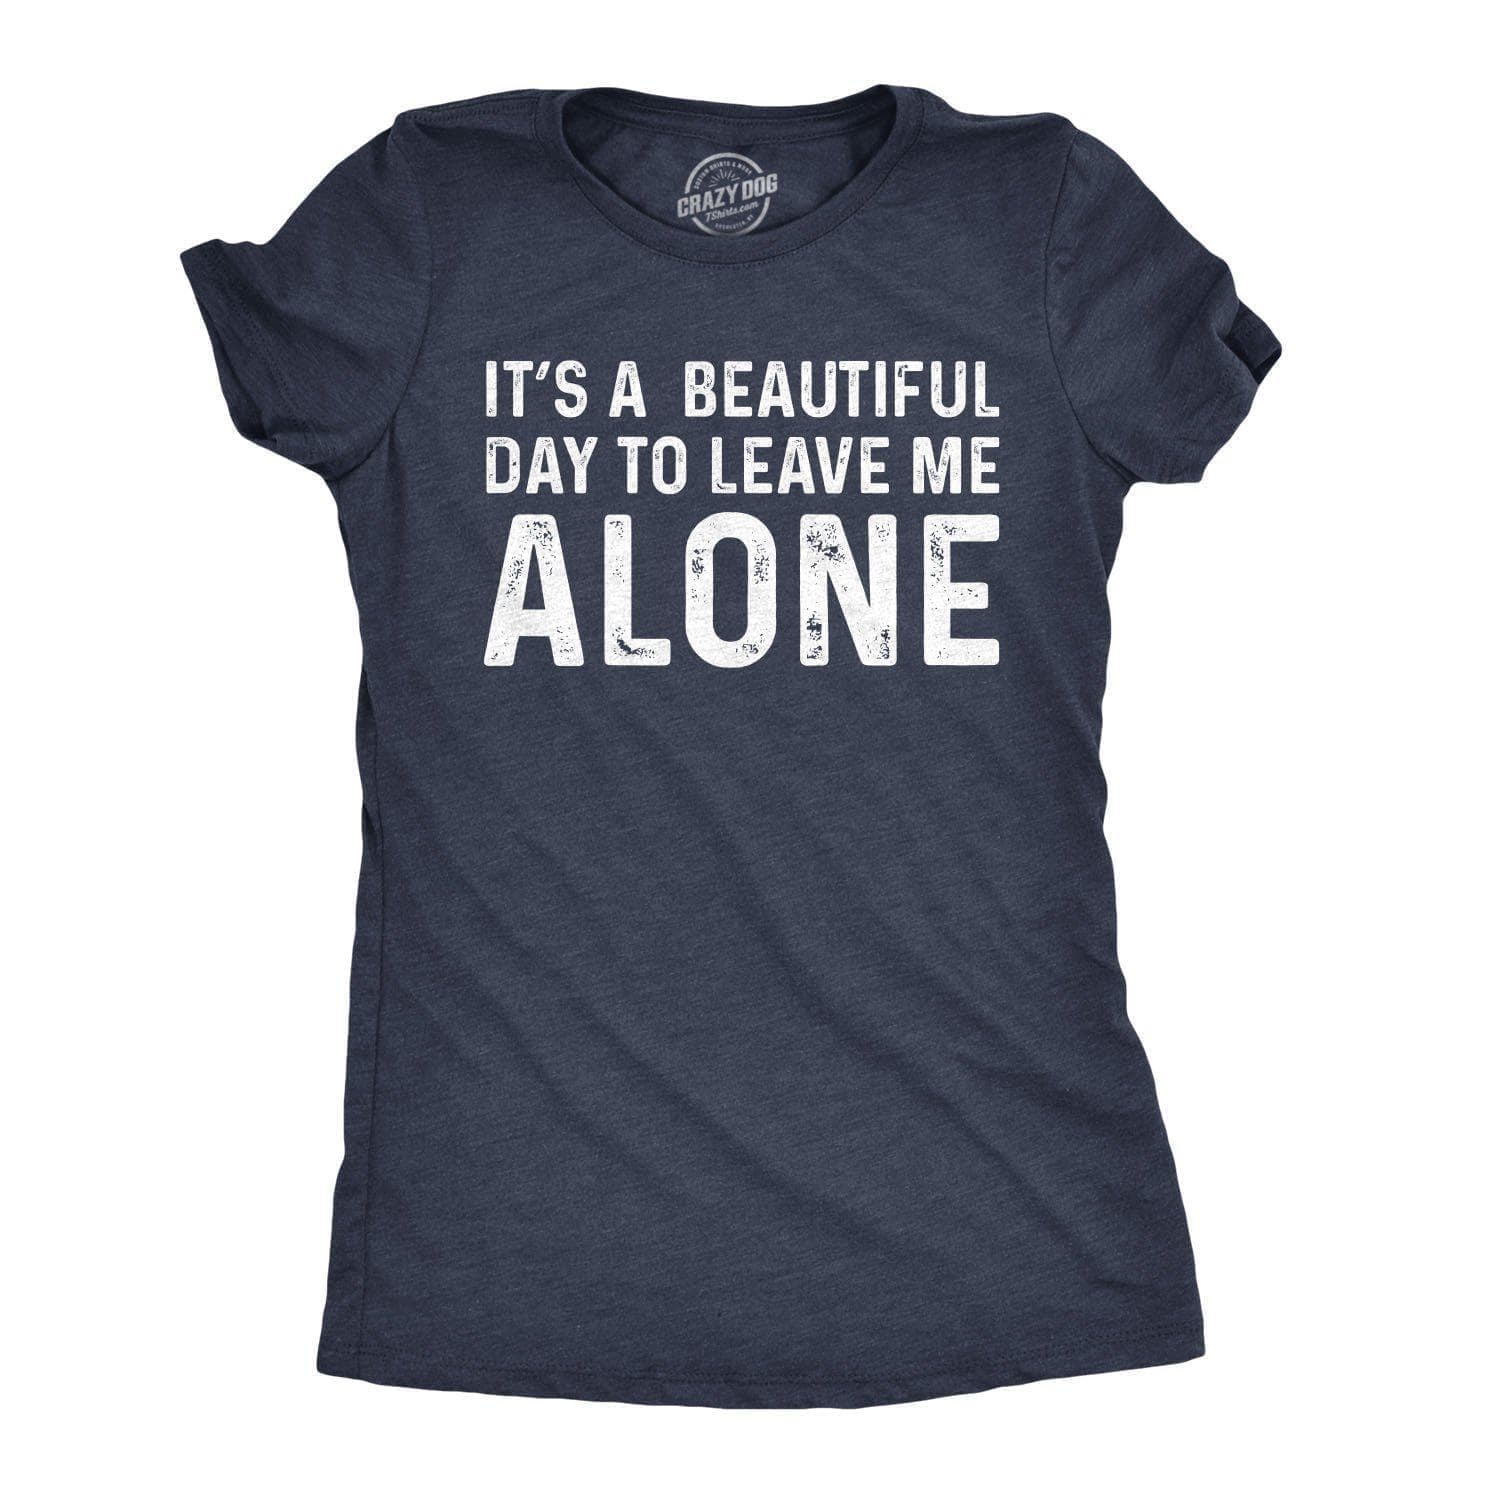 It's A Beautiful Day To Leave Me Alone Women's Tshirt - Crazy Dog T-Shirts